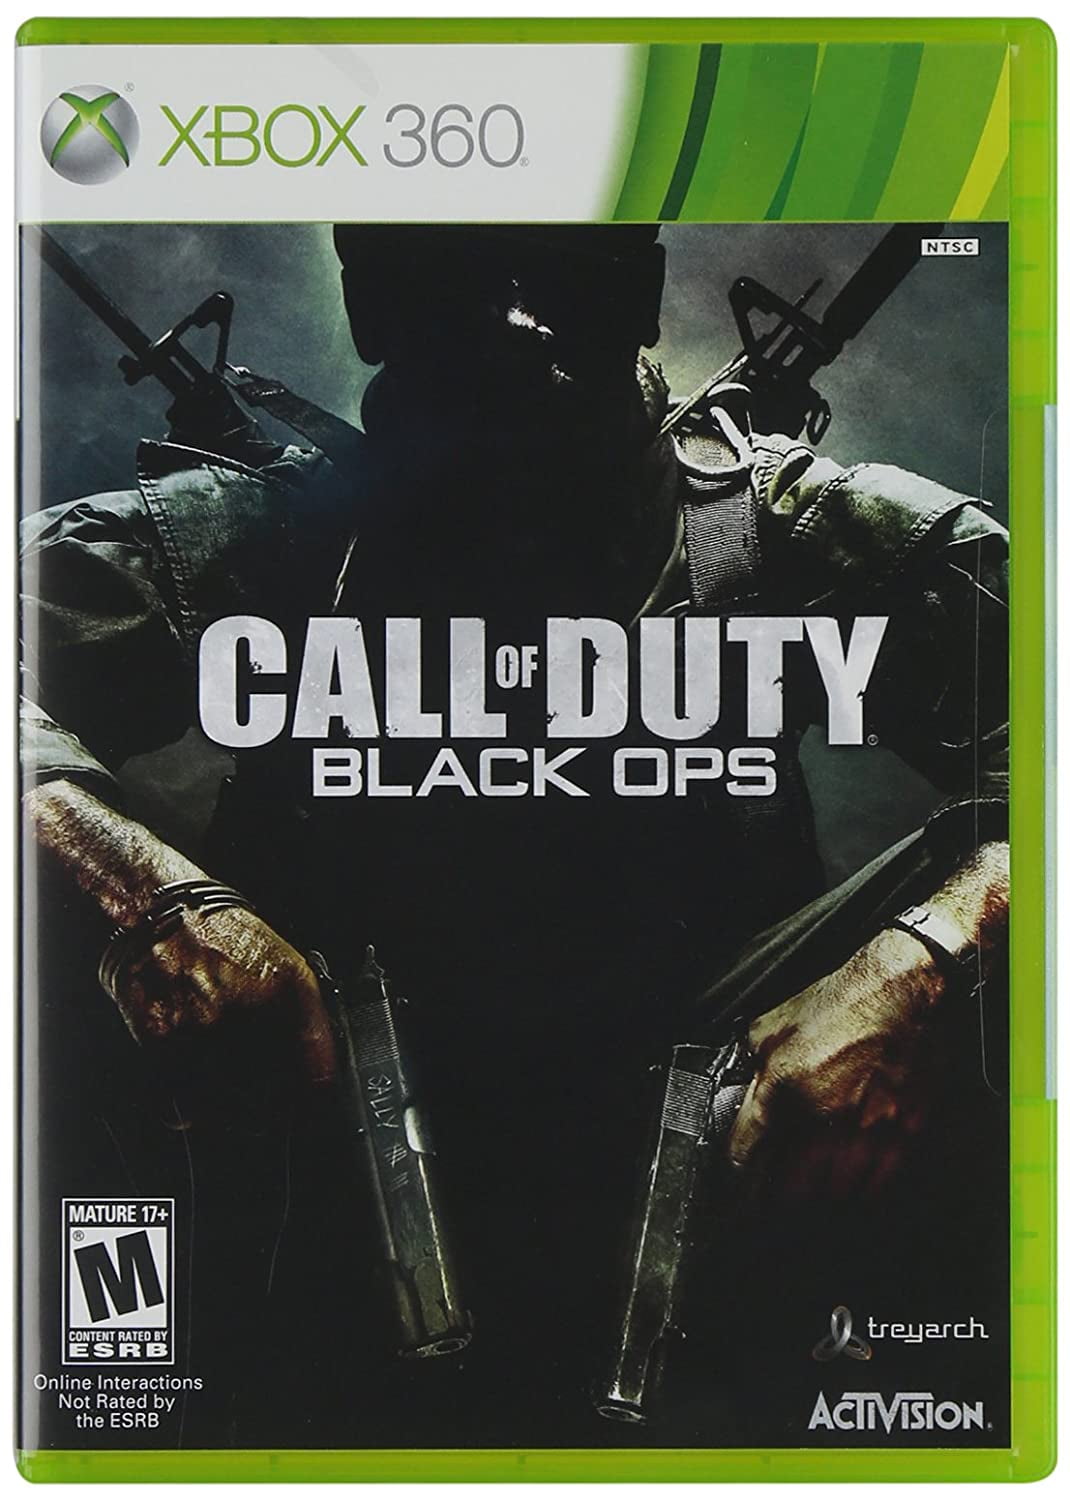 Co-Optimus - Call of Duty: Black Ops 2 (Xbox 360) Co-Op Information